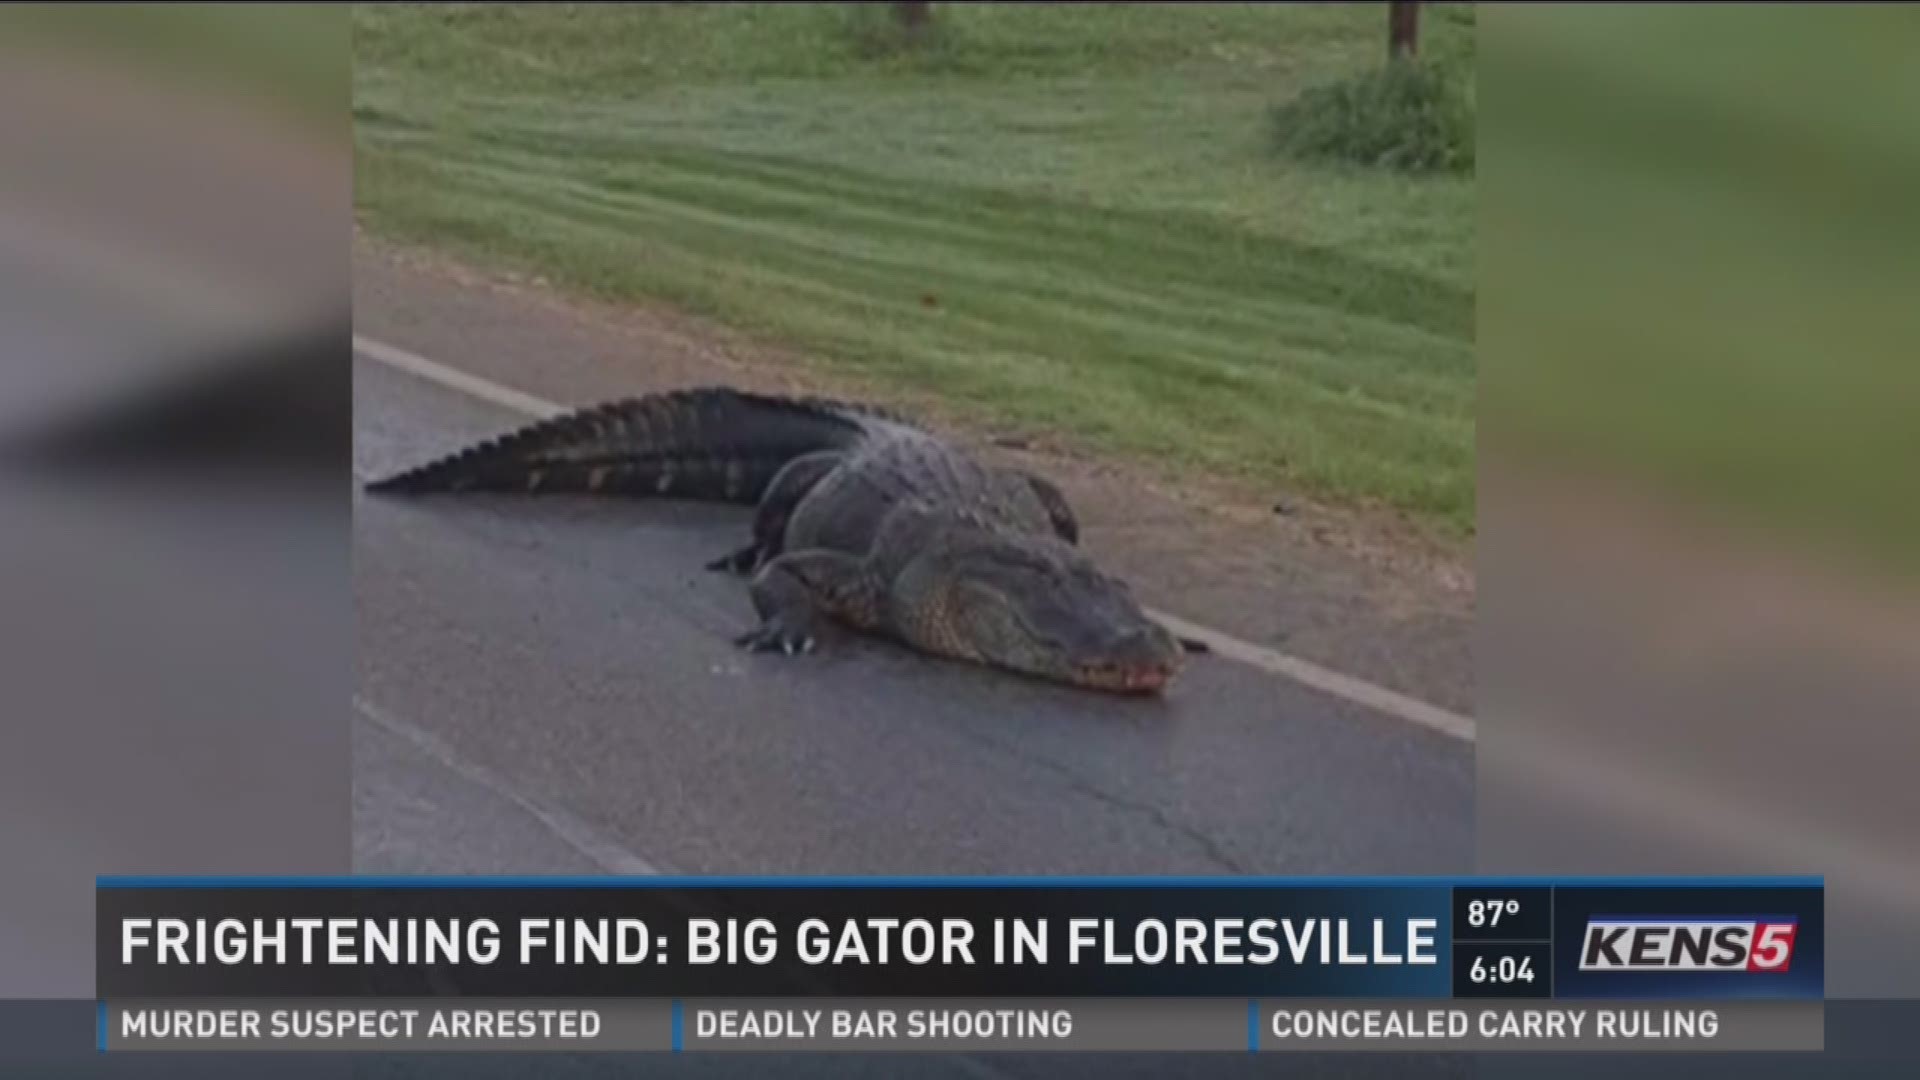 Why did the gator cross the road? Apparently, to get to